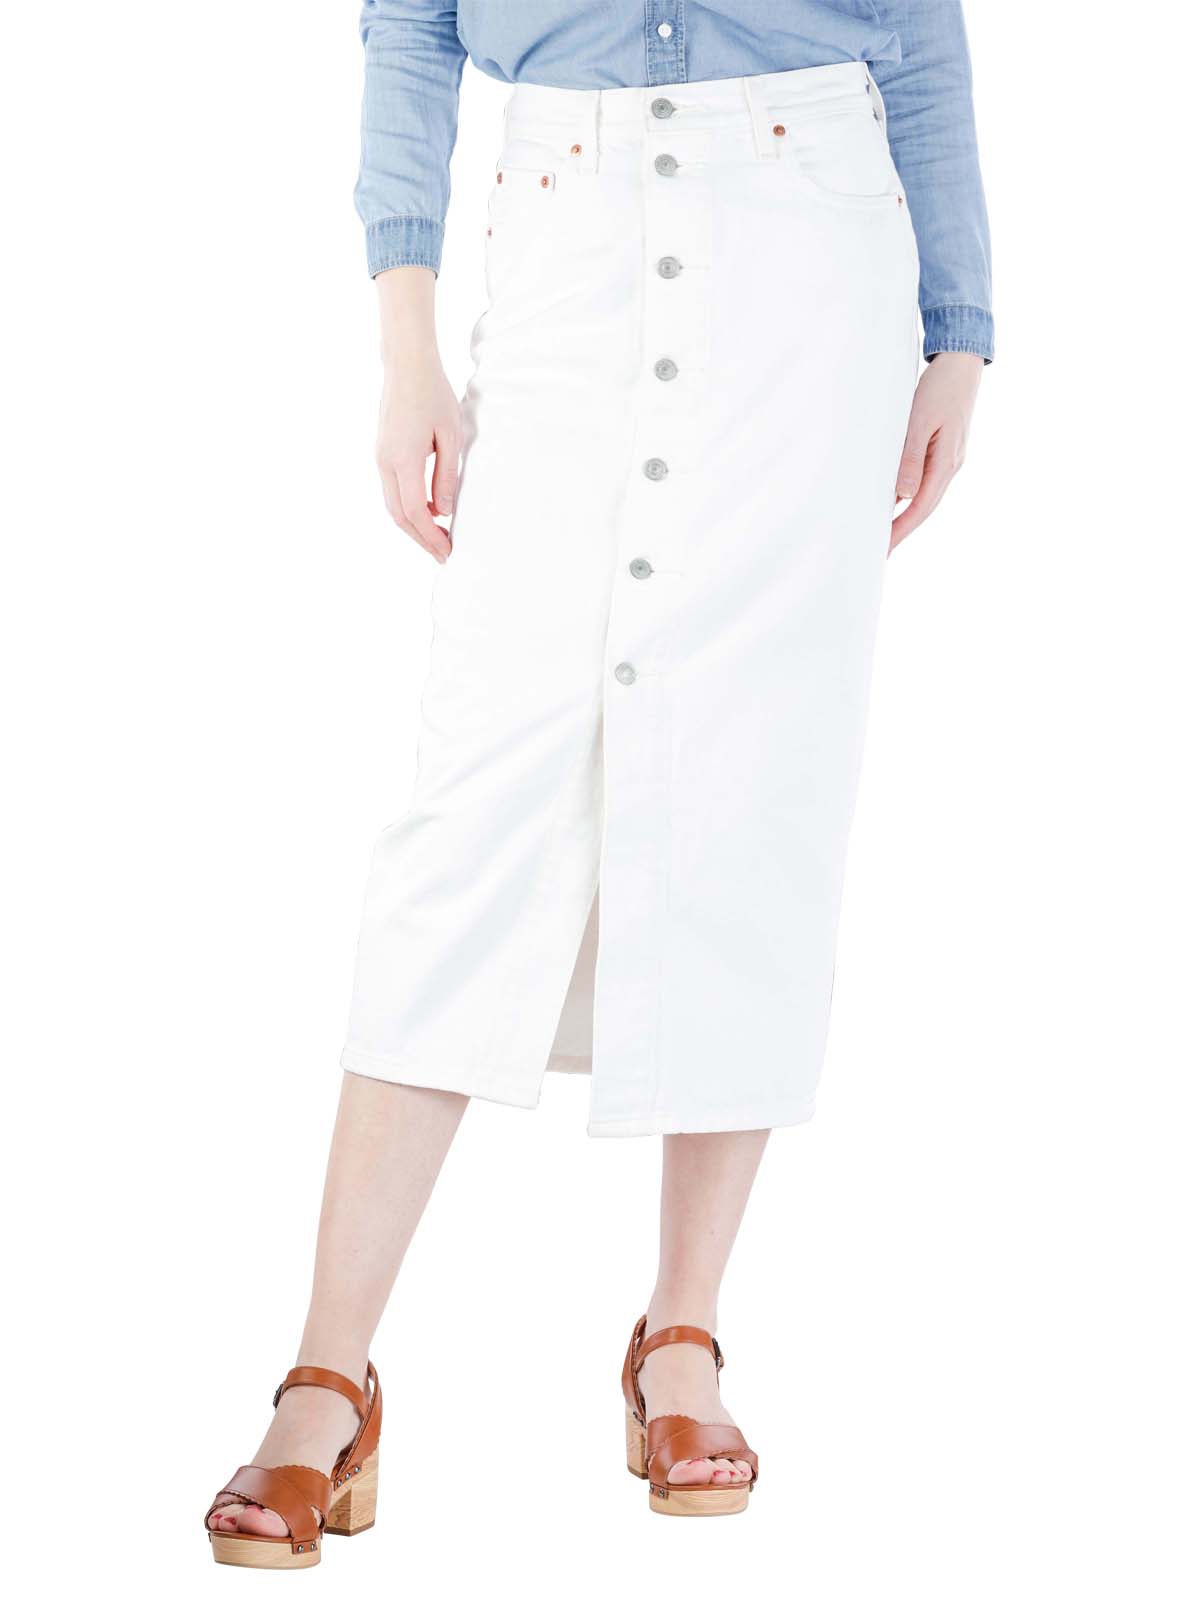 Levi's Button Front Midi Skirt white cell Levi's Women's Skirt | Free  Shipping on  - SIMPLY LOOK GOOD